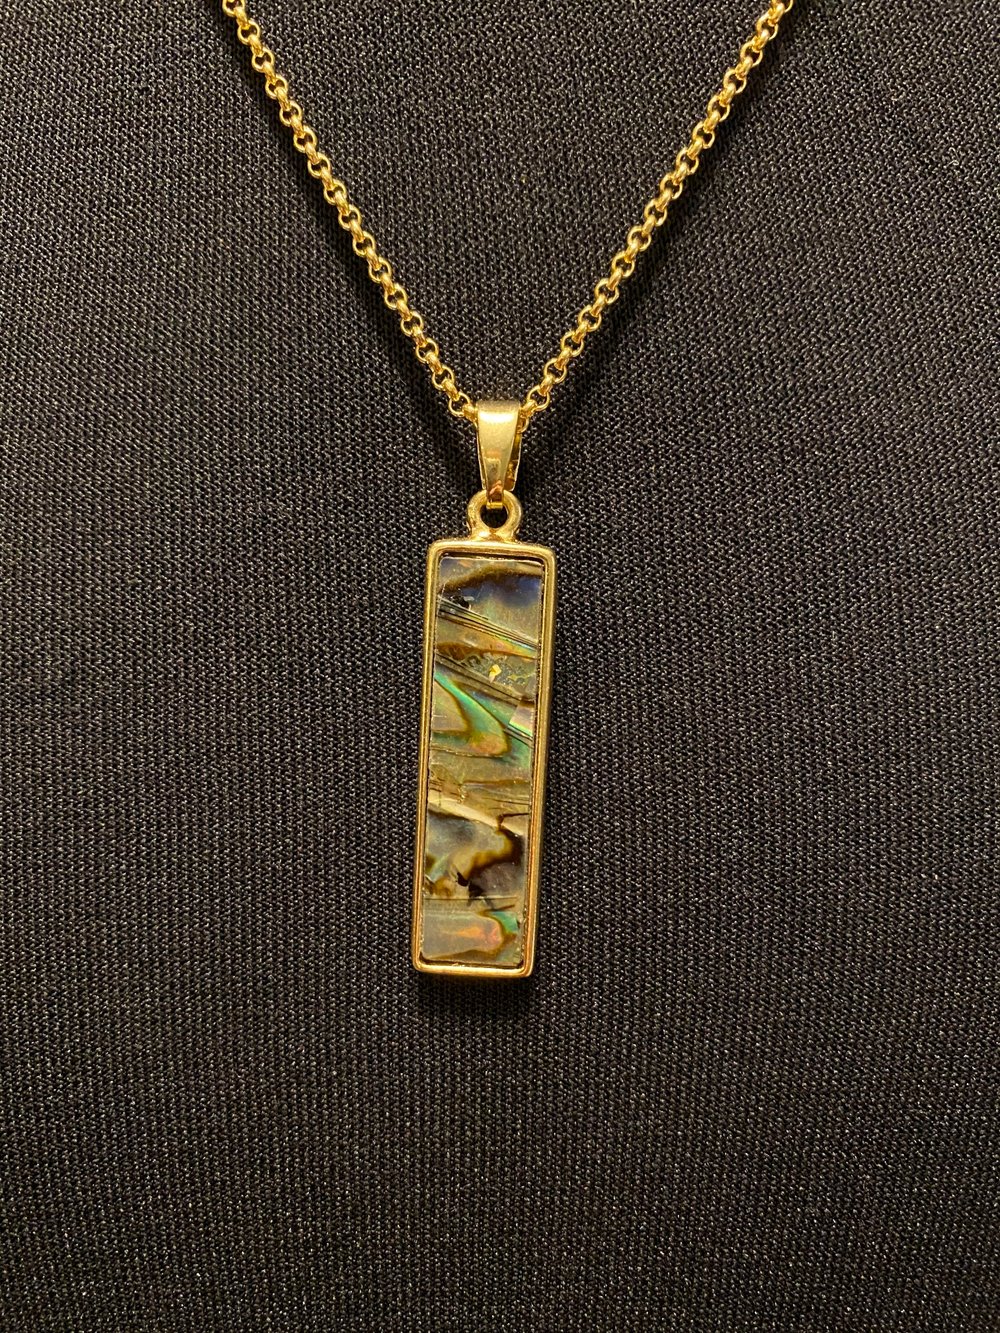 Abalone Tab and Gold Plated Chain Necklace